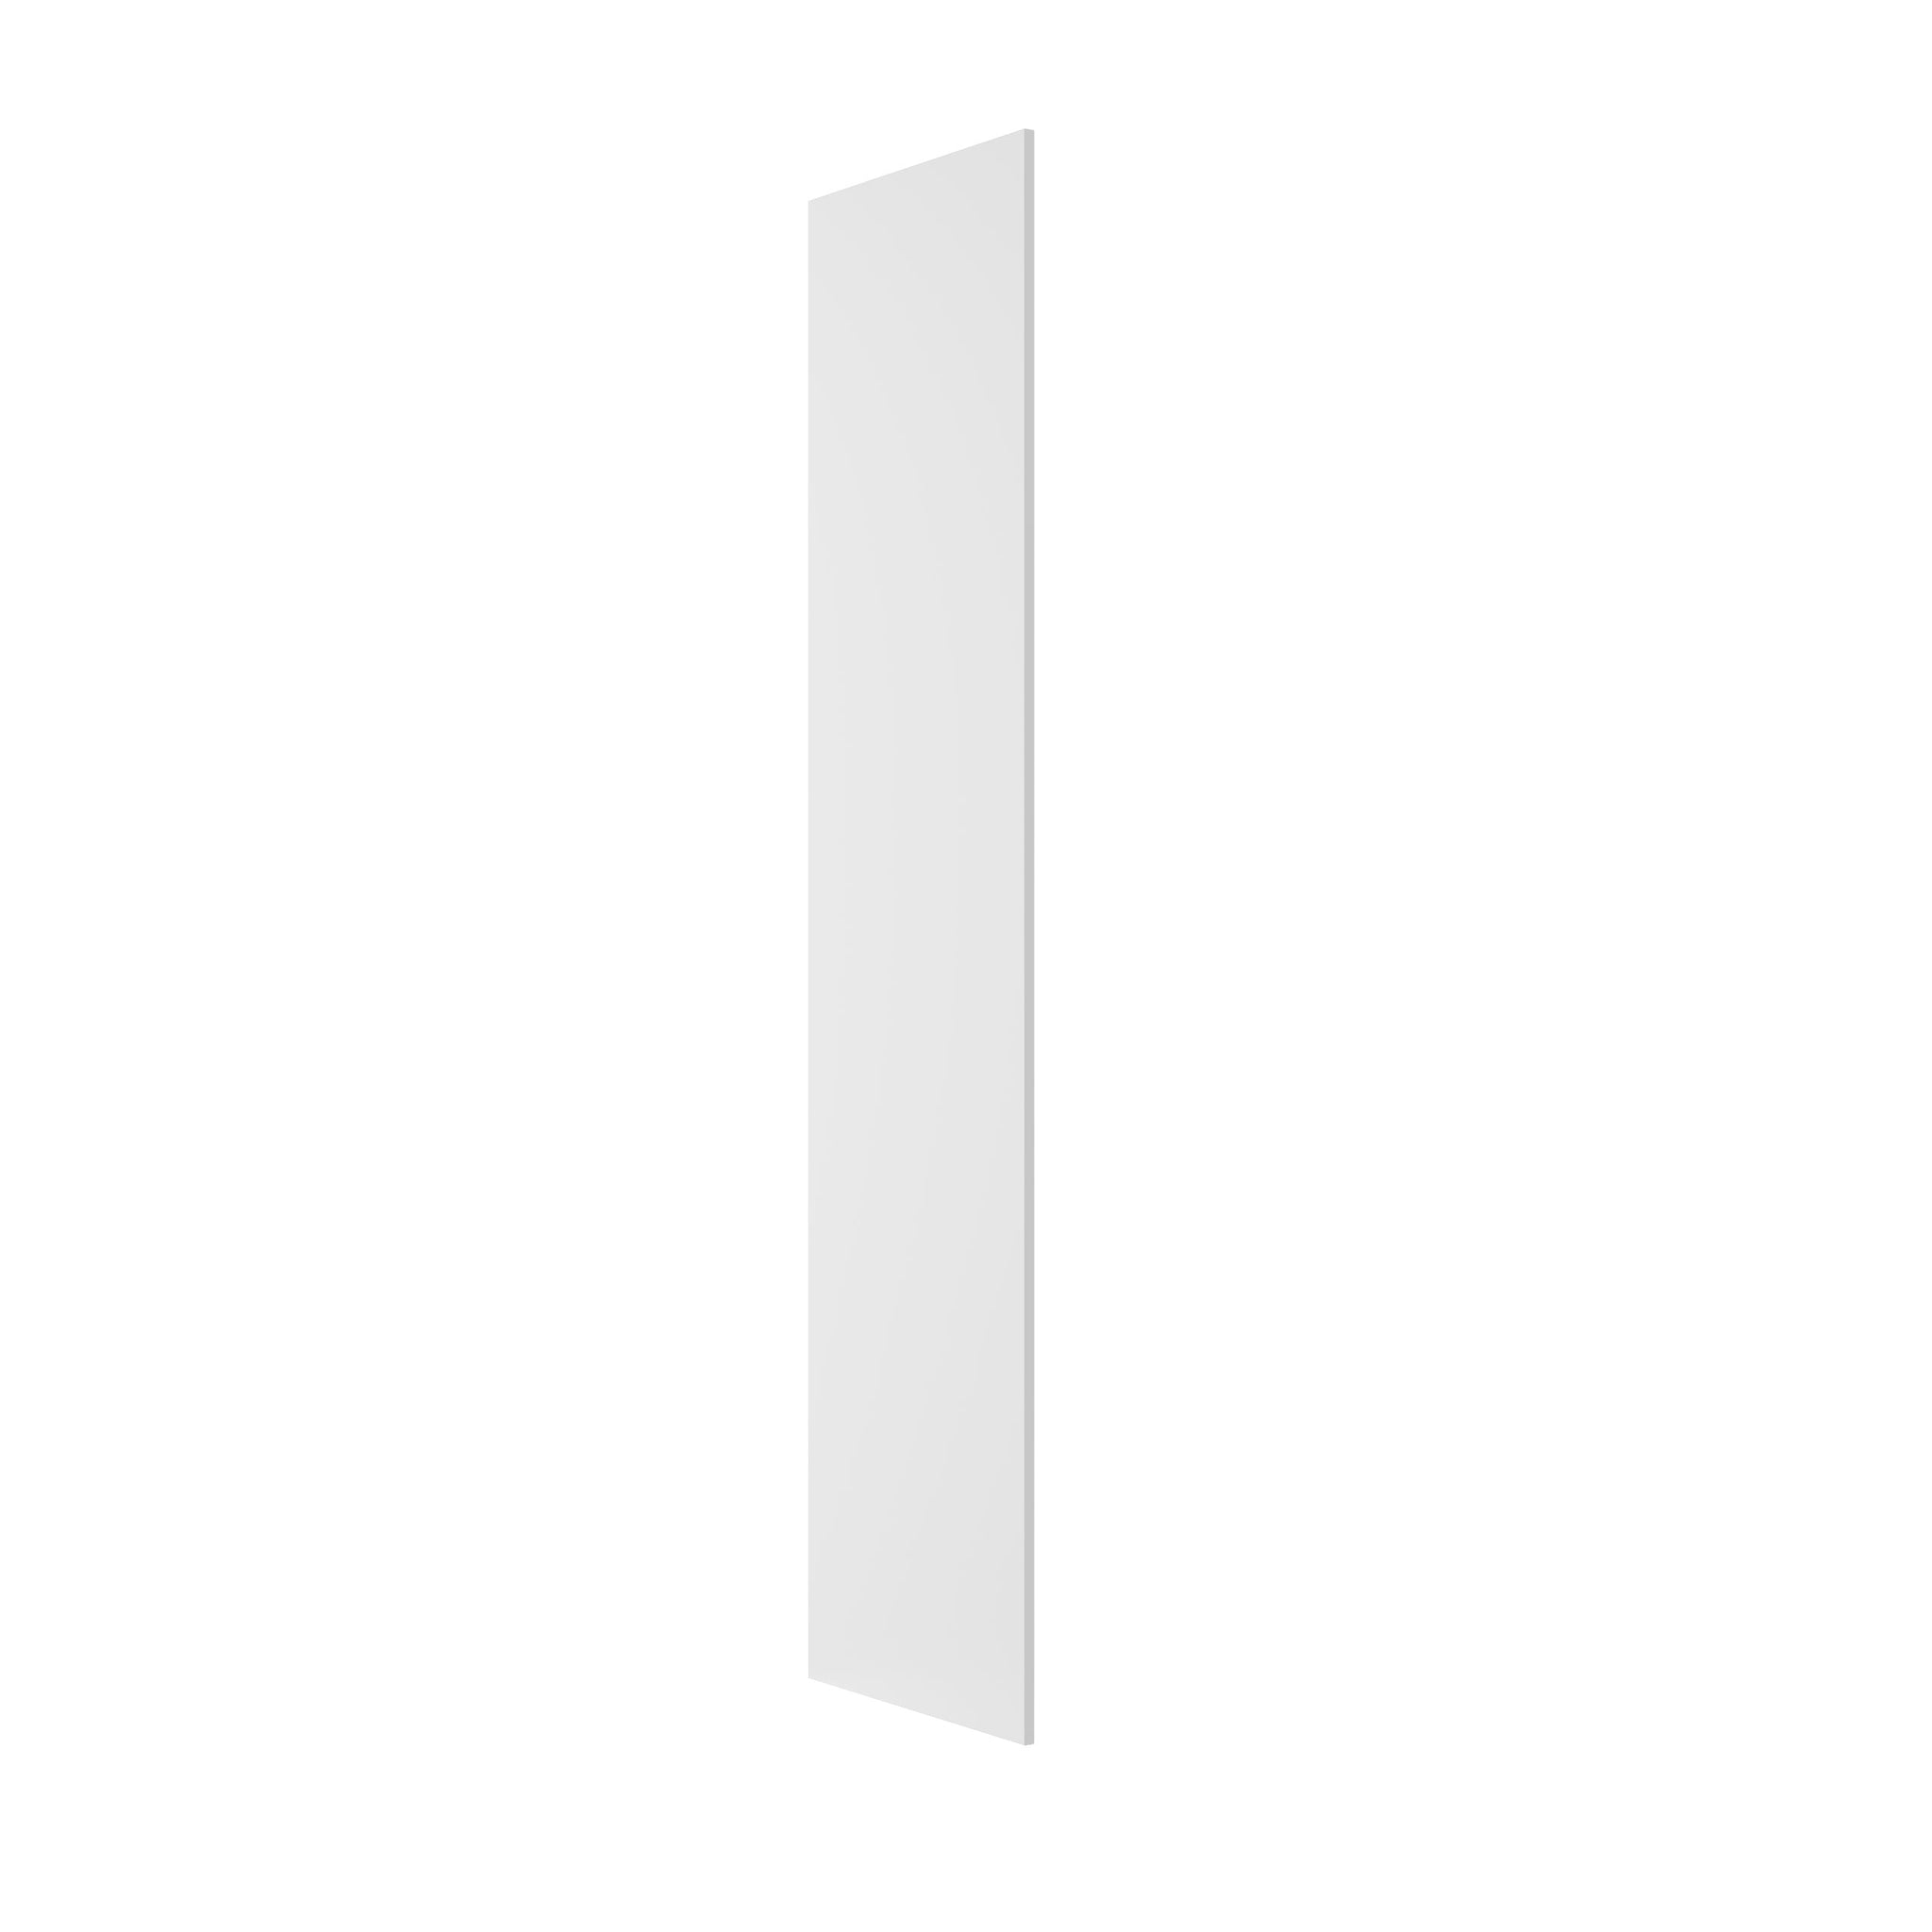 96 Inch High Refrigerator End Panel Cabinet - Luxor White Shaker - Ready To Assemble, 0.75"W x 96"H x 24"D